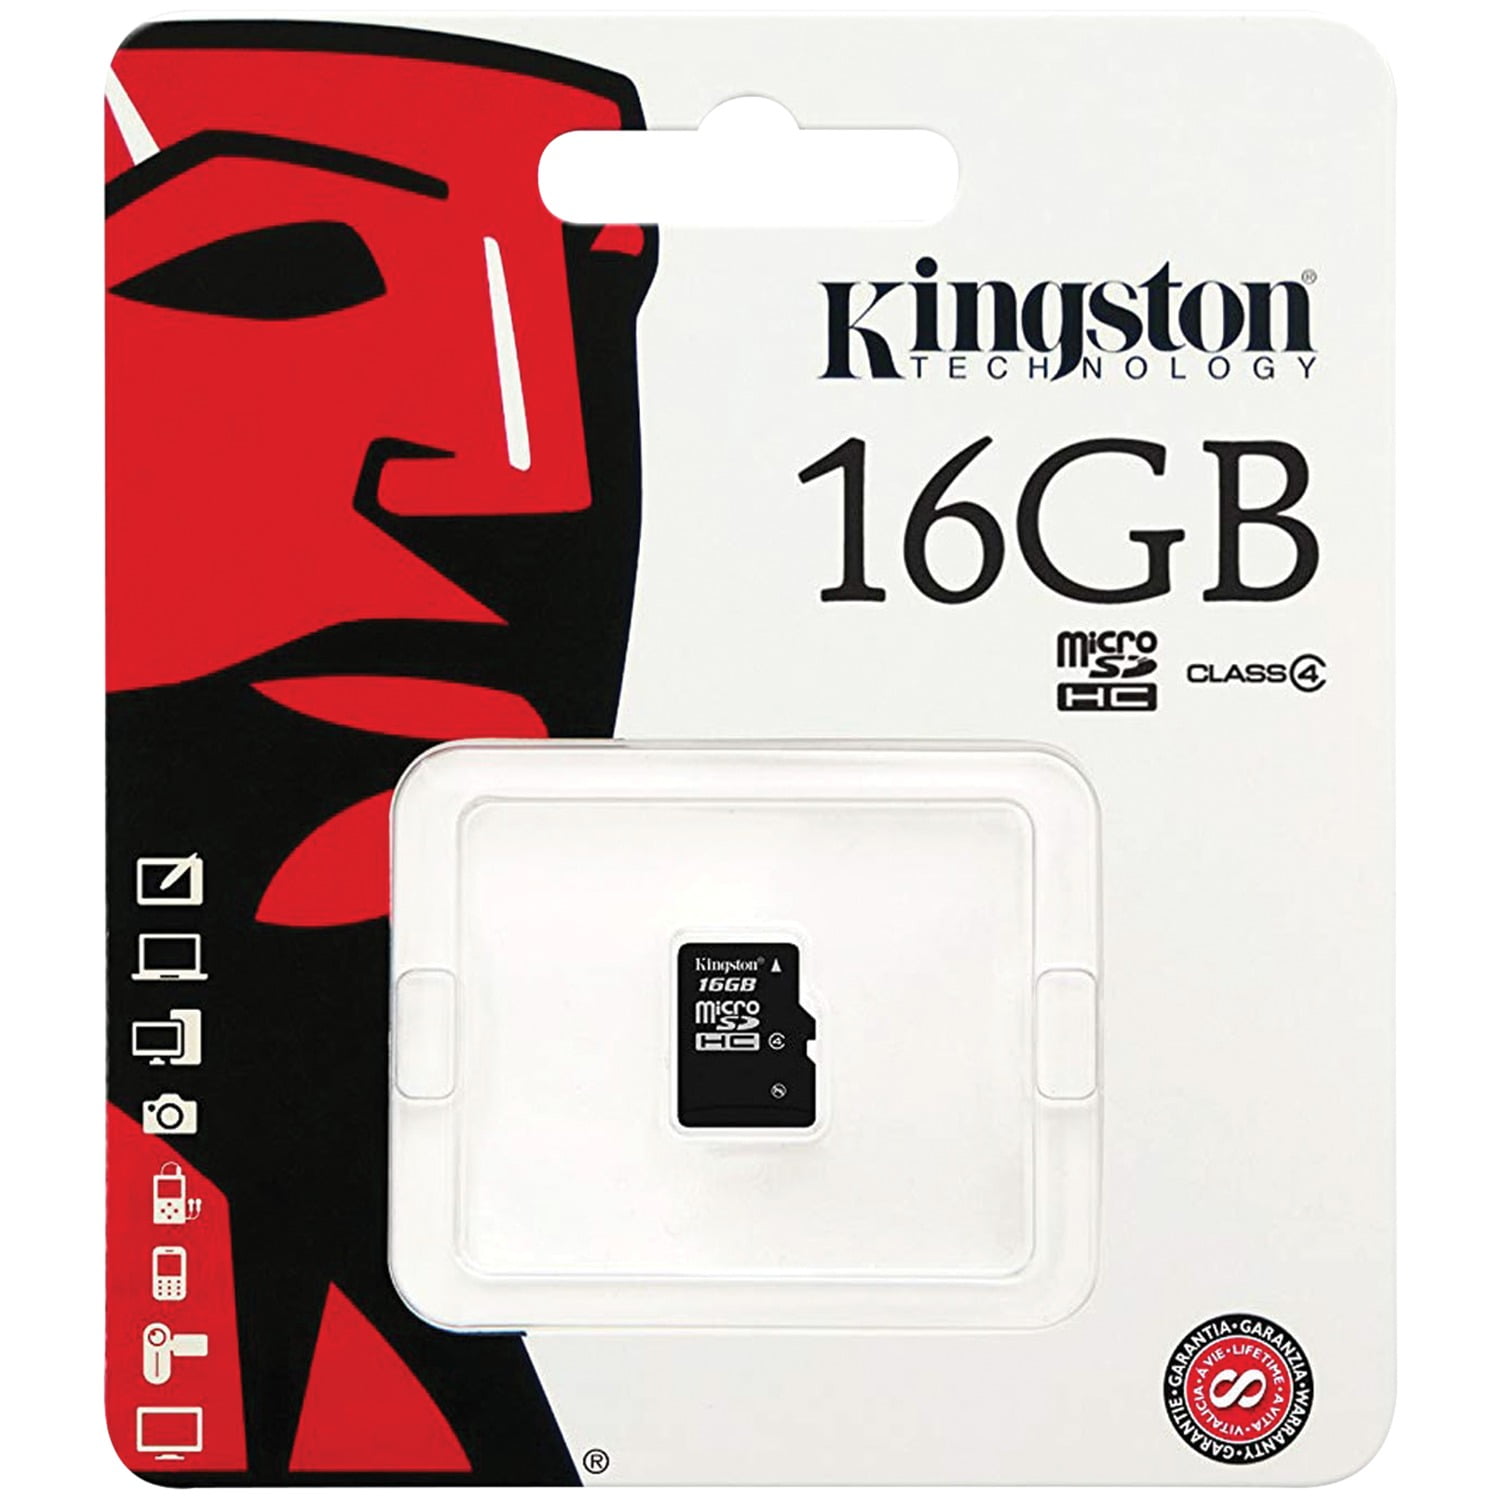 NEW KINGSTON MICRO SD SDHC MEMORY CARD 8gb 16gb 32gb CLASS 4 CARD WITH ADAPTER 